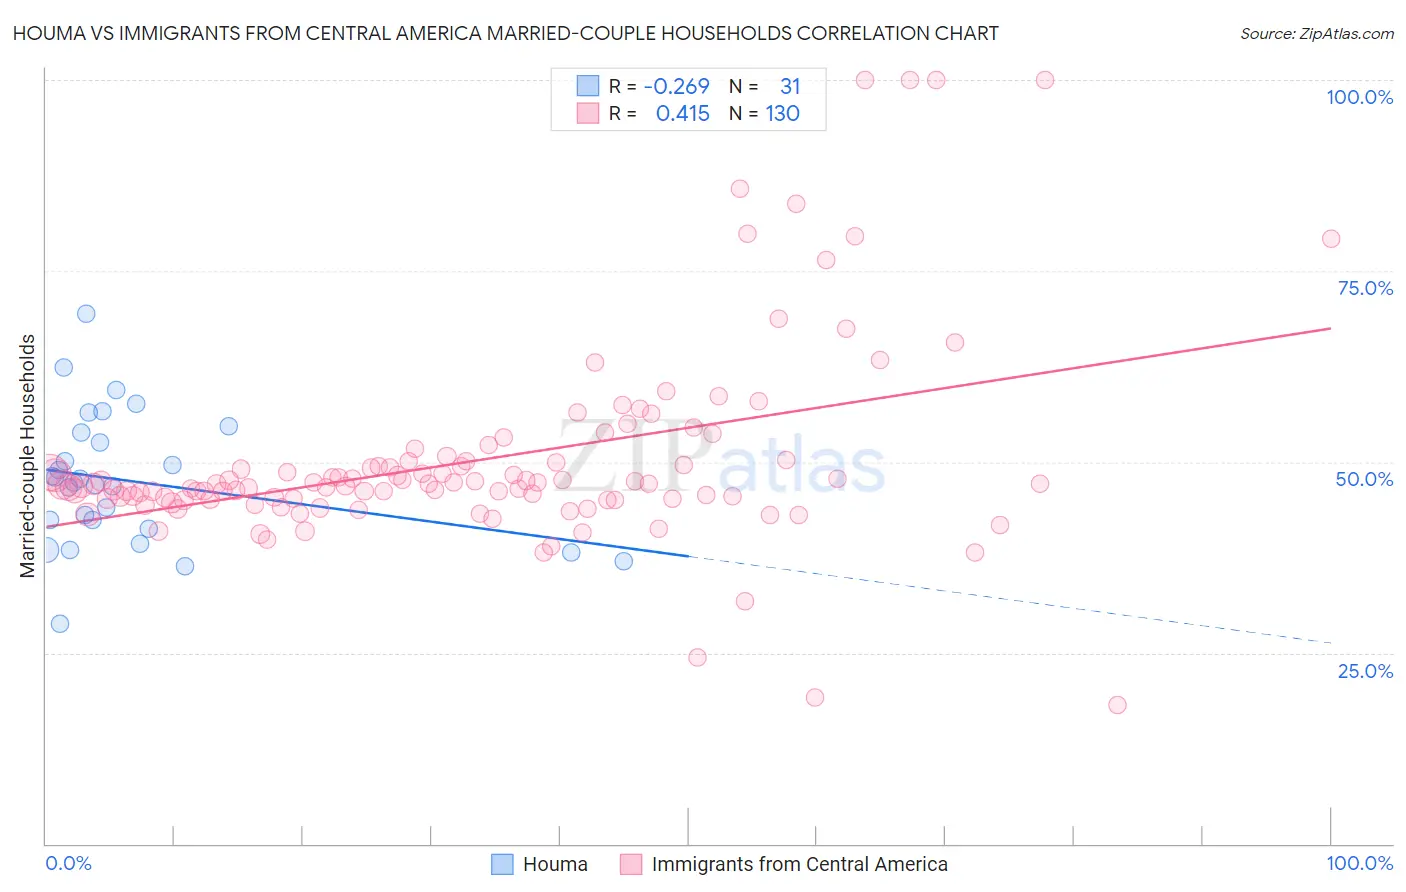 Houma vs Immigrants from Central America Married-couple Households